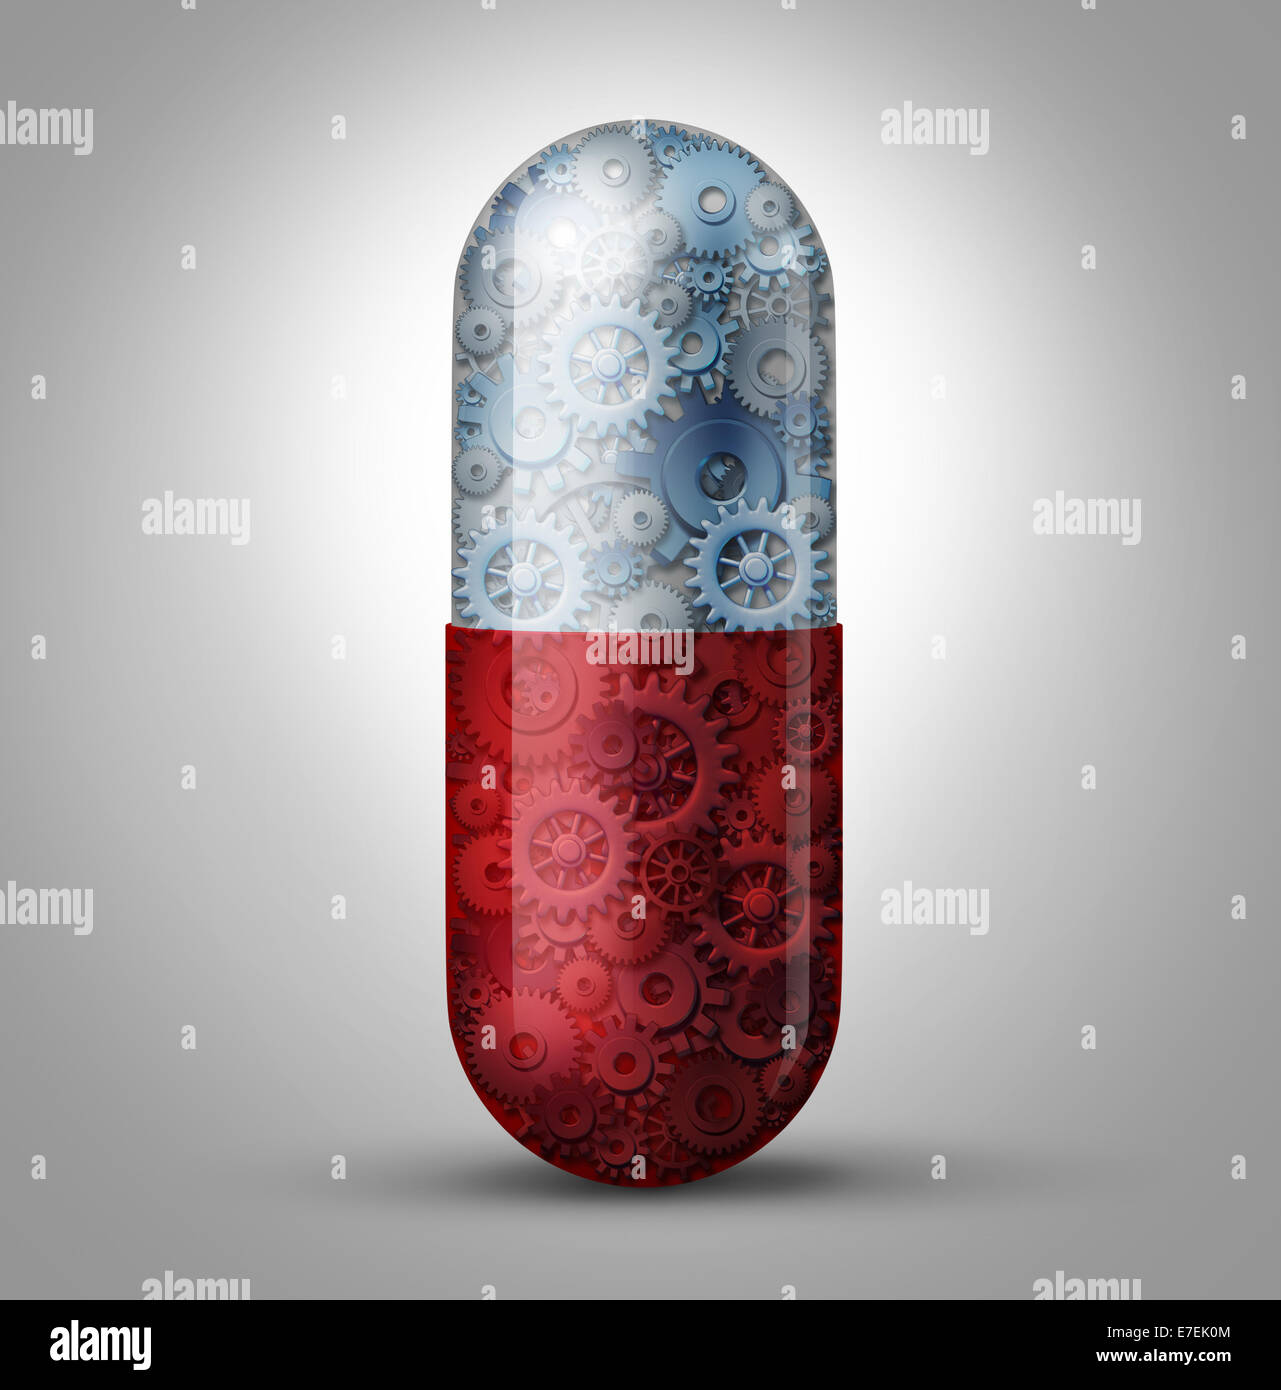 Future of medicine and bioengineering concept as a magic pill capsule with gears and cogs inside as a medical symbol for nano robotic technology curing biological disease and extending human lifespan through innovative science. Stock Photo